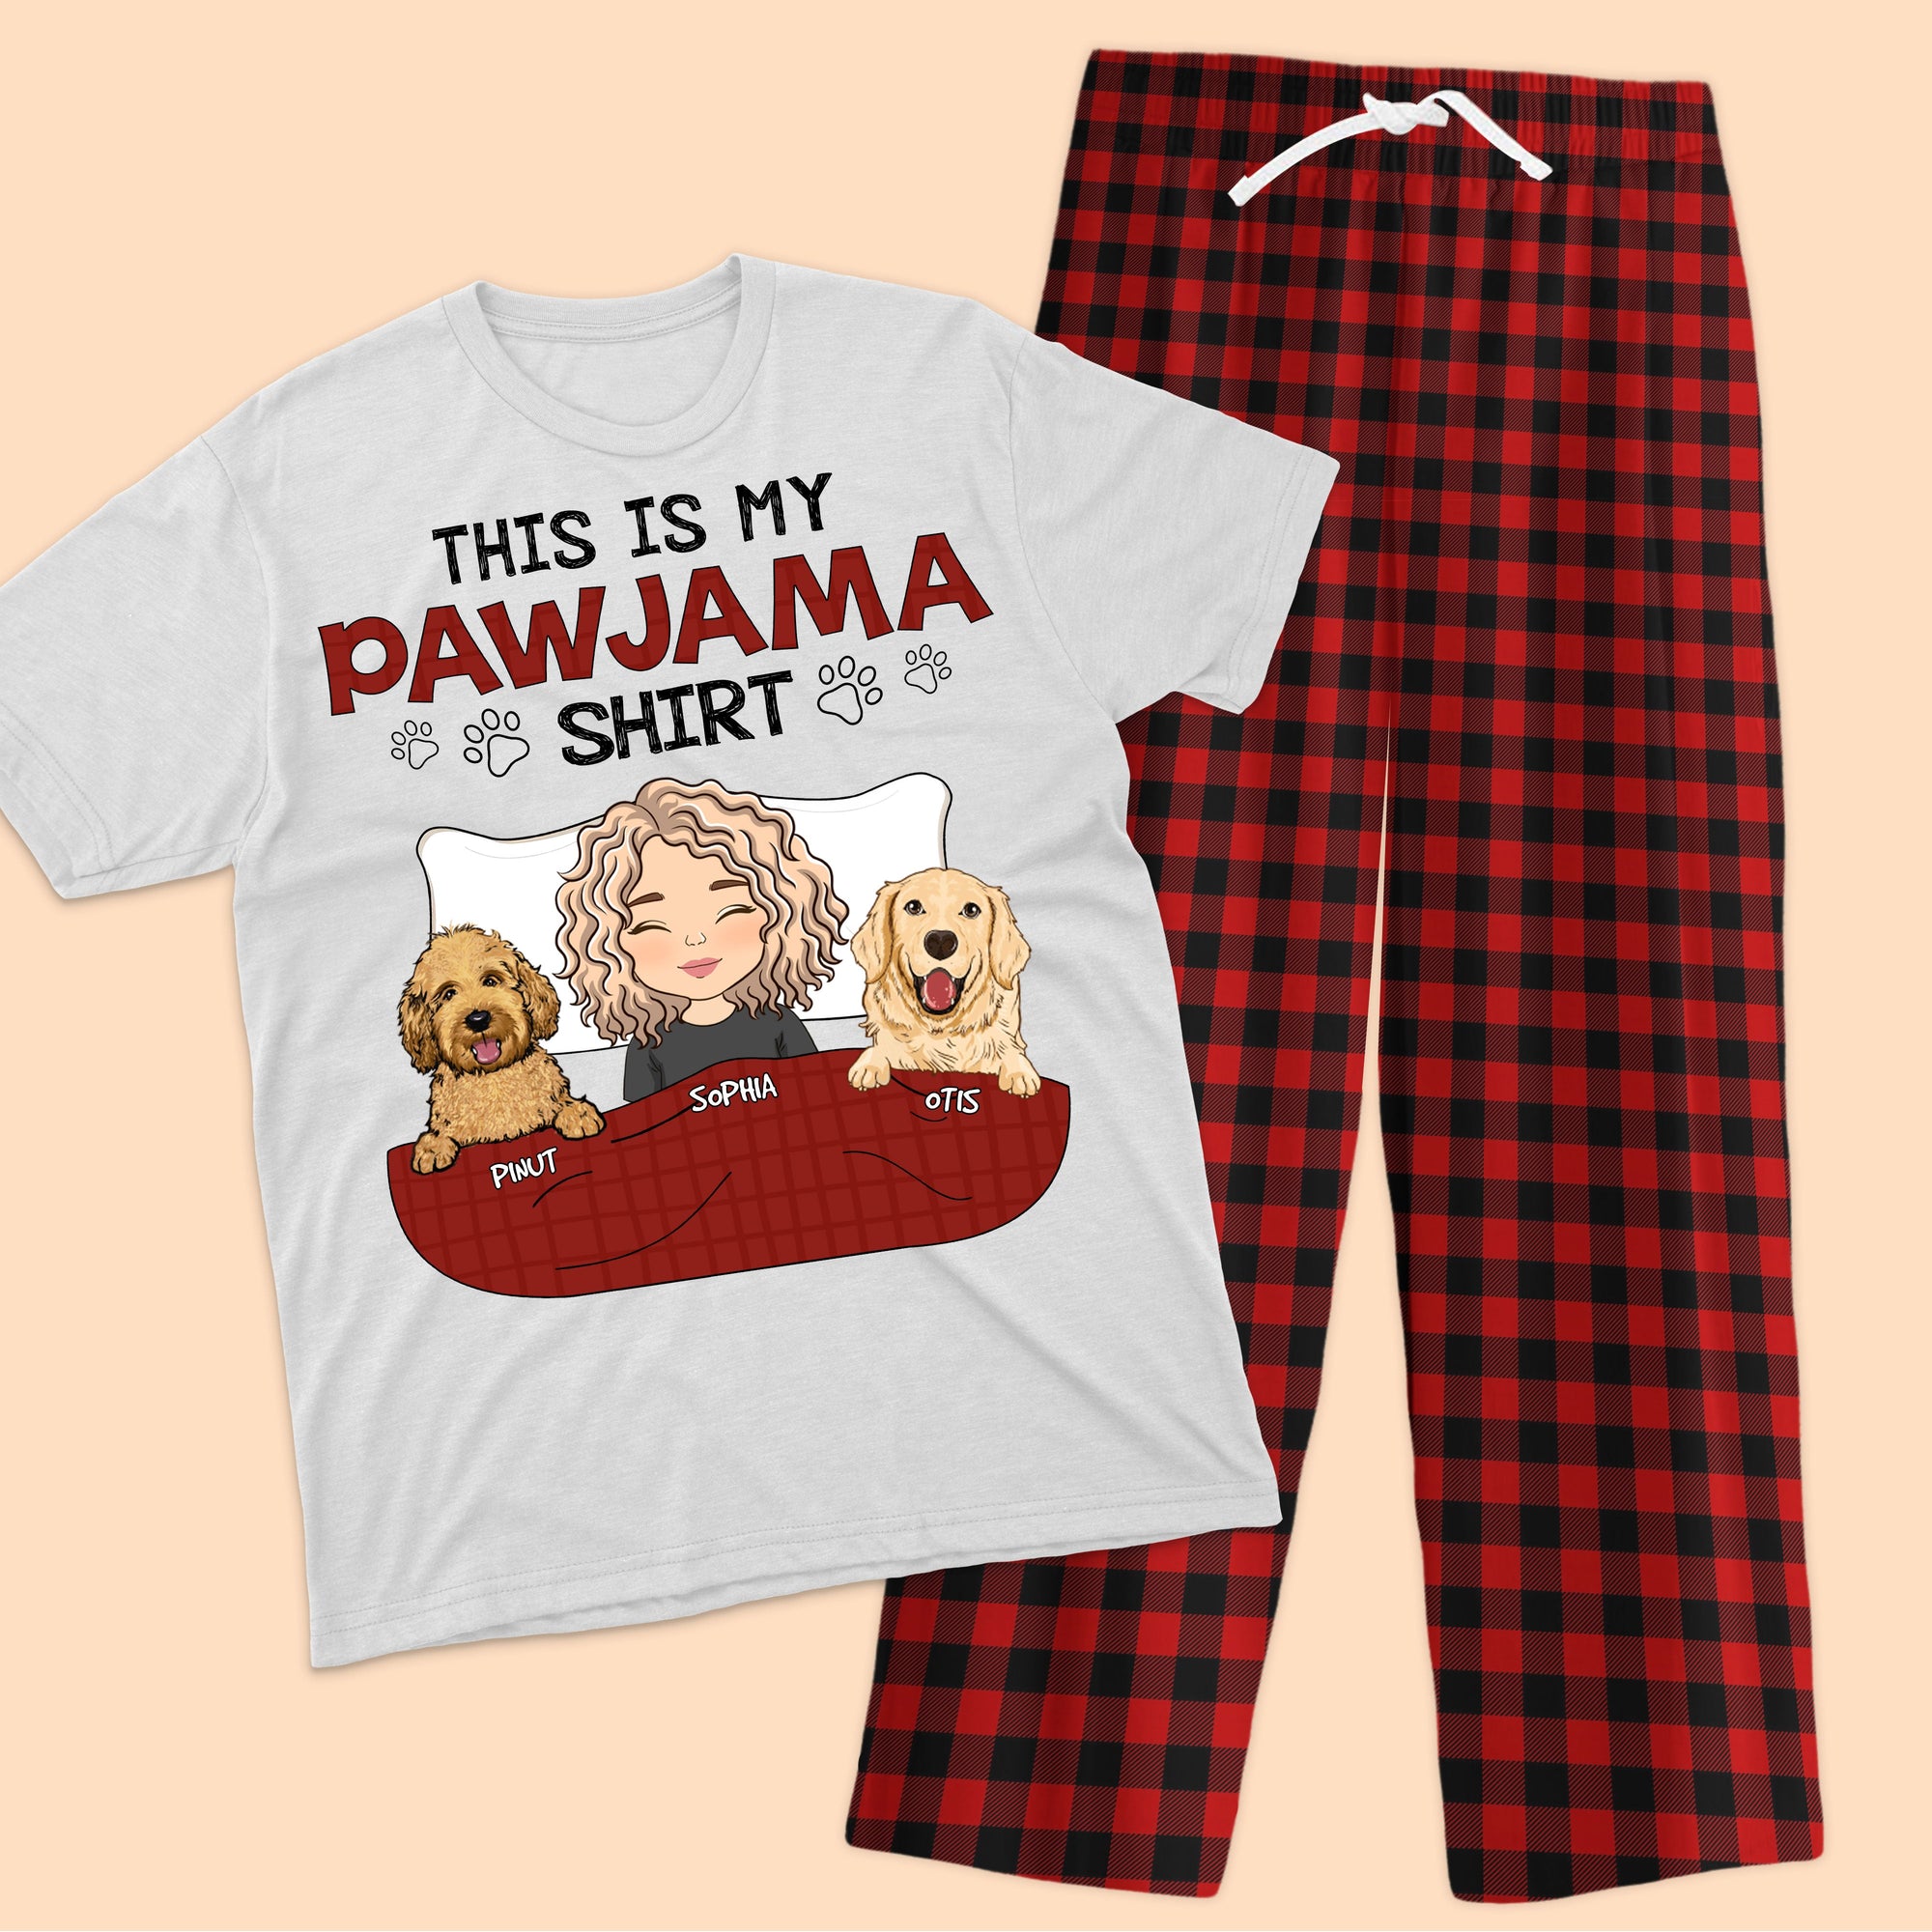 This My Pawjama Shirt - Custom Appearance And Name - Personalized Pajamas Long Pants